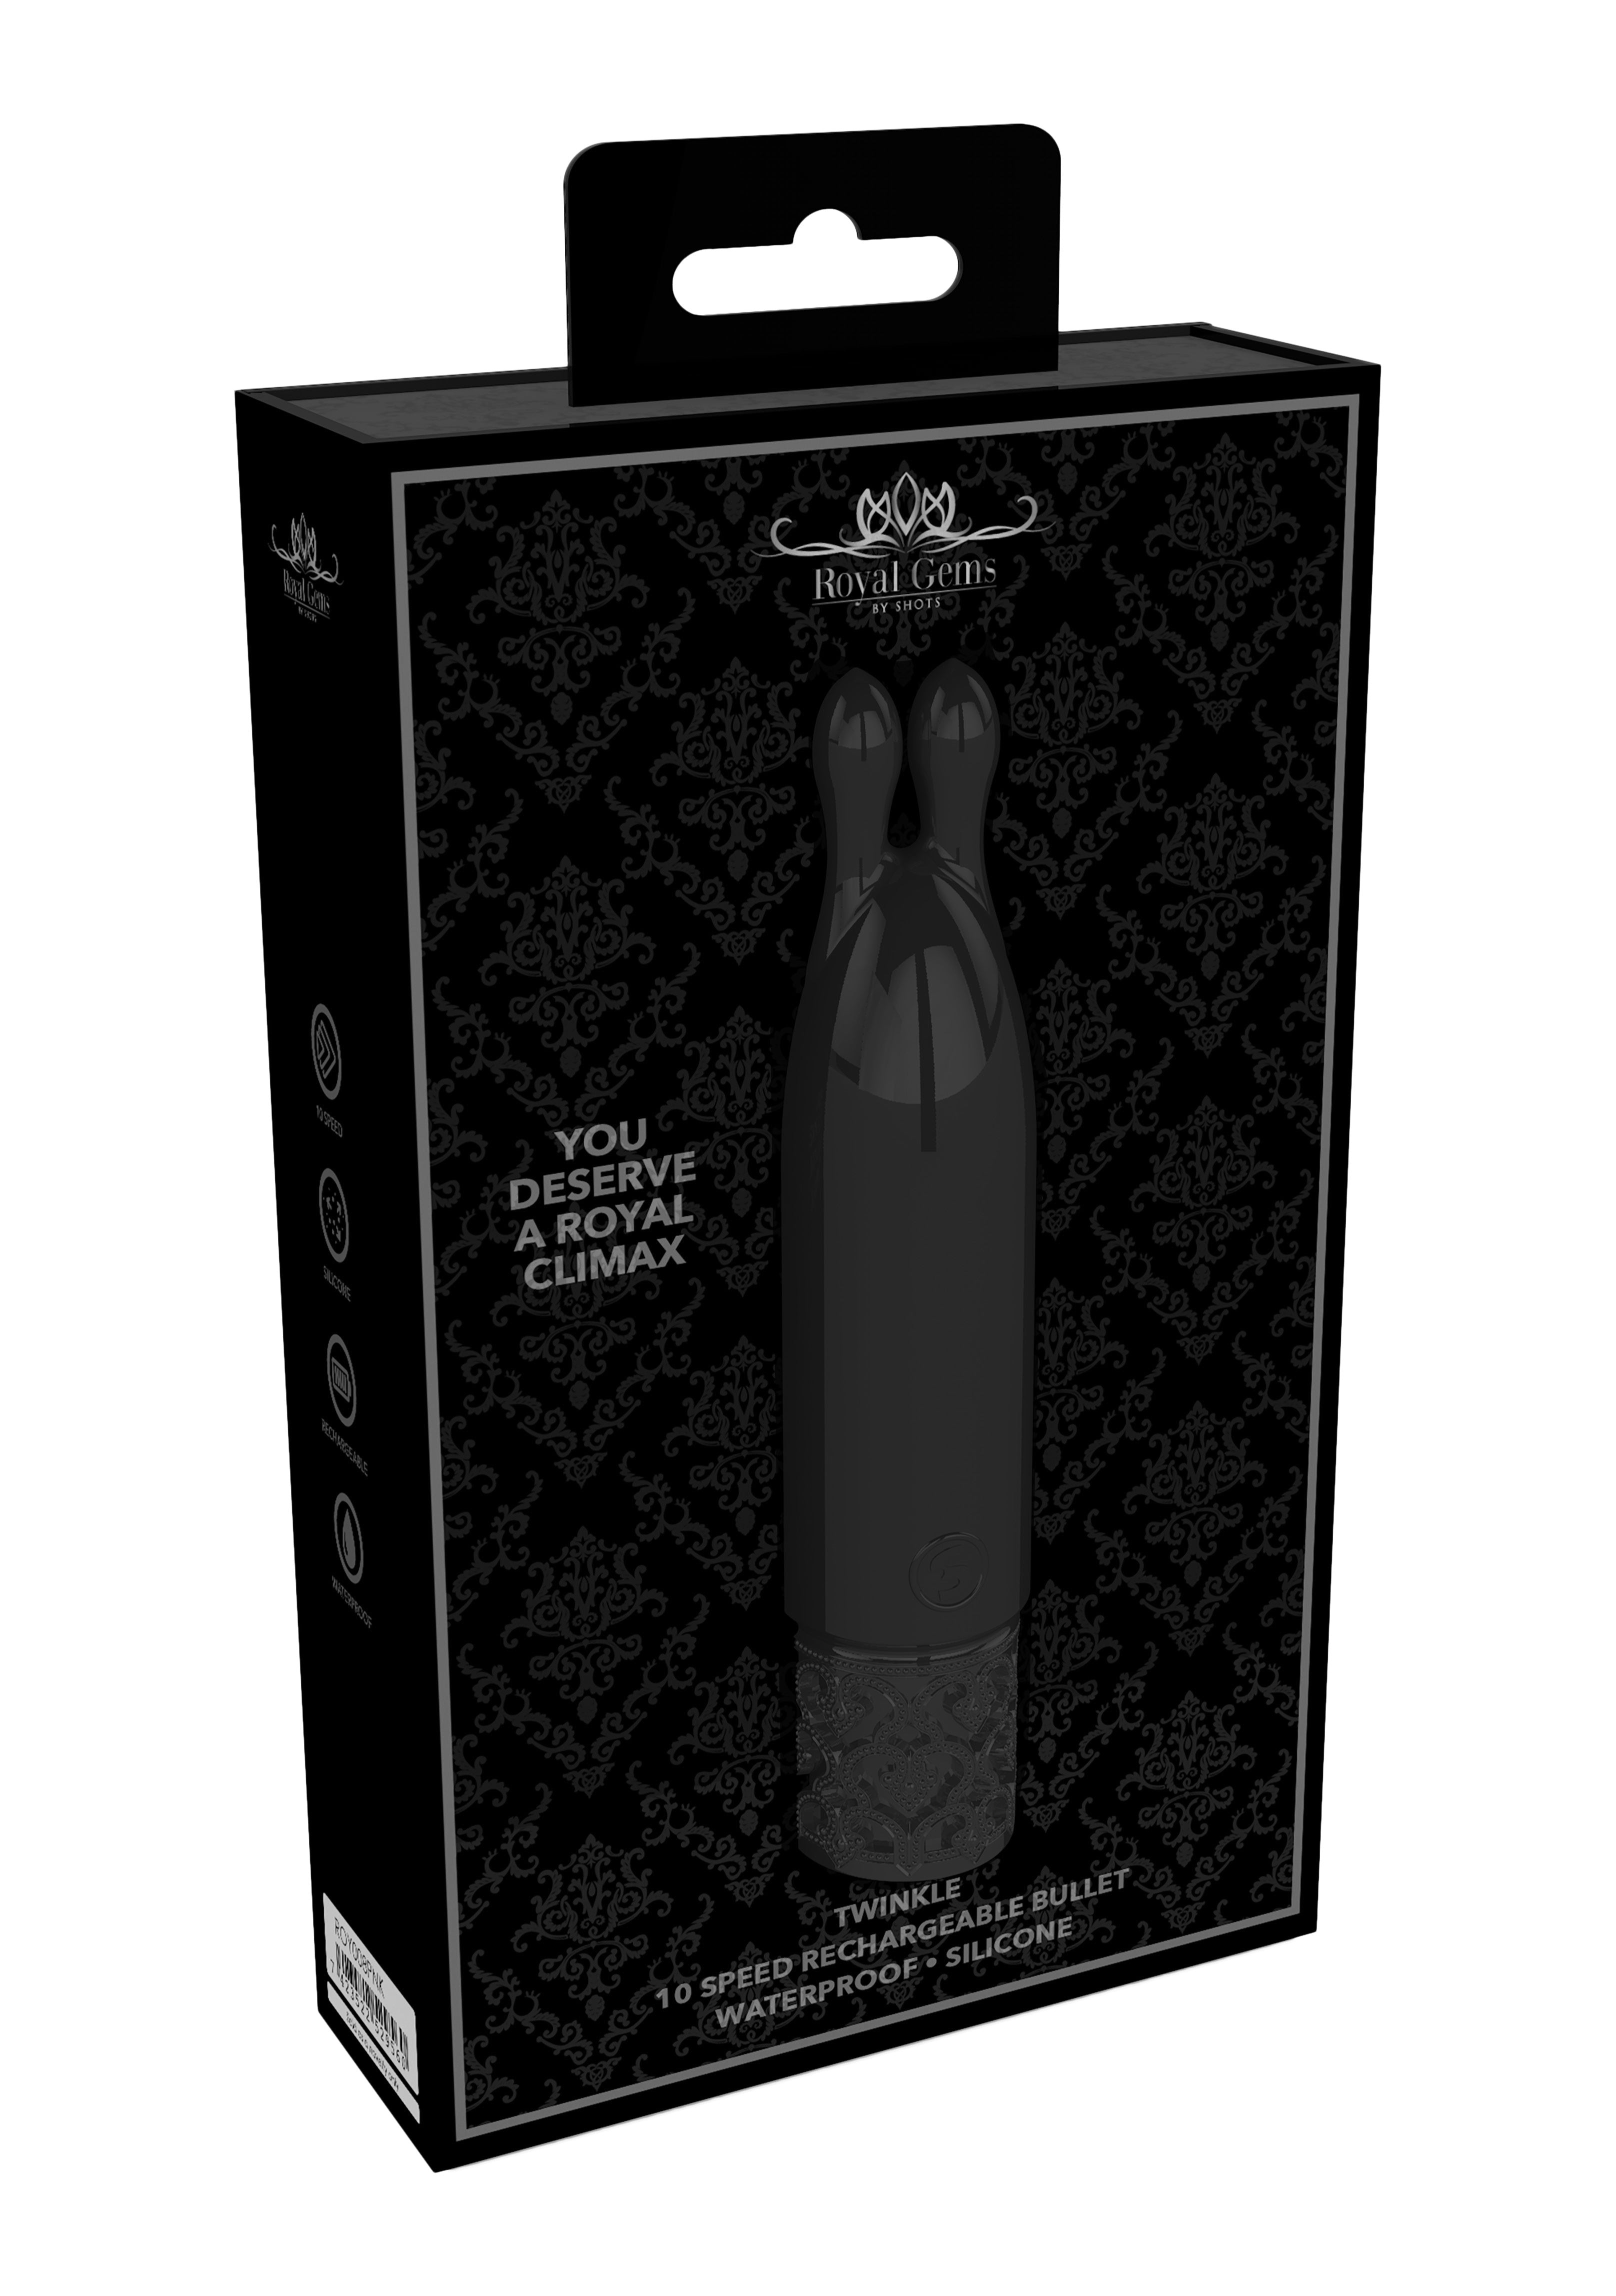 Royal Gems Rechargeable Silicone Bullet - Twinkle - Black